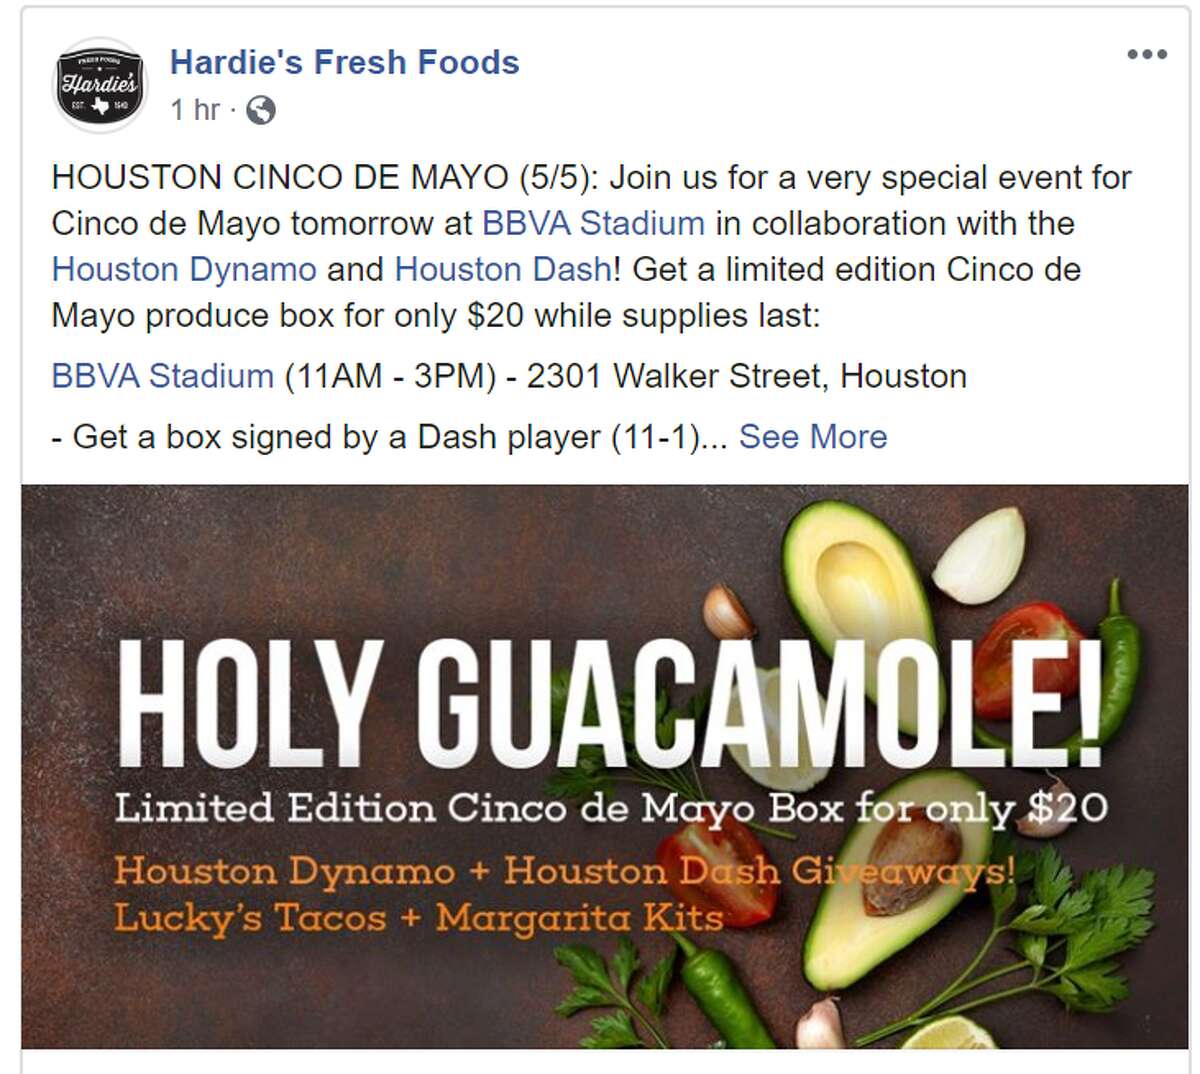 Hardies's Fresh Foods is partnering with Dynamo & Dash to host a drive-through produce market on Cinco de Mayo from 11:00 a.m. to 3:00 p.m.